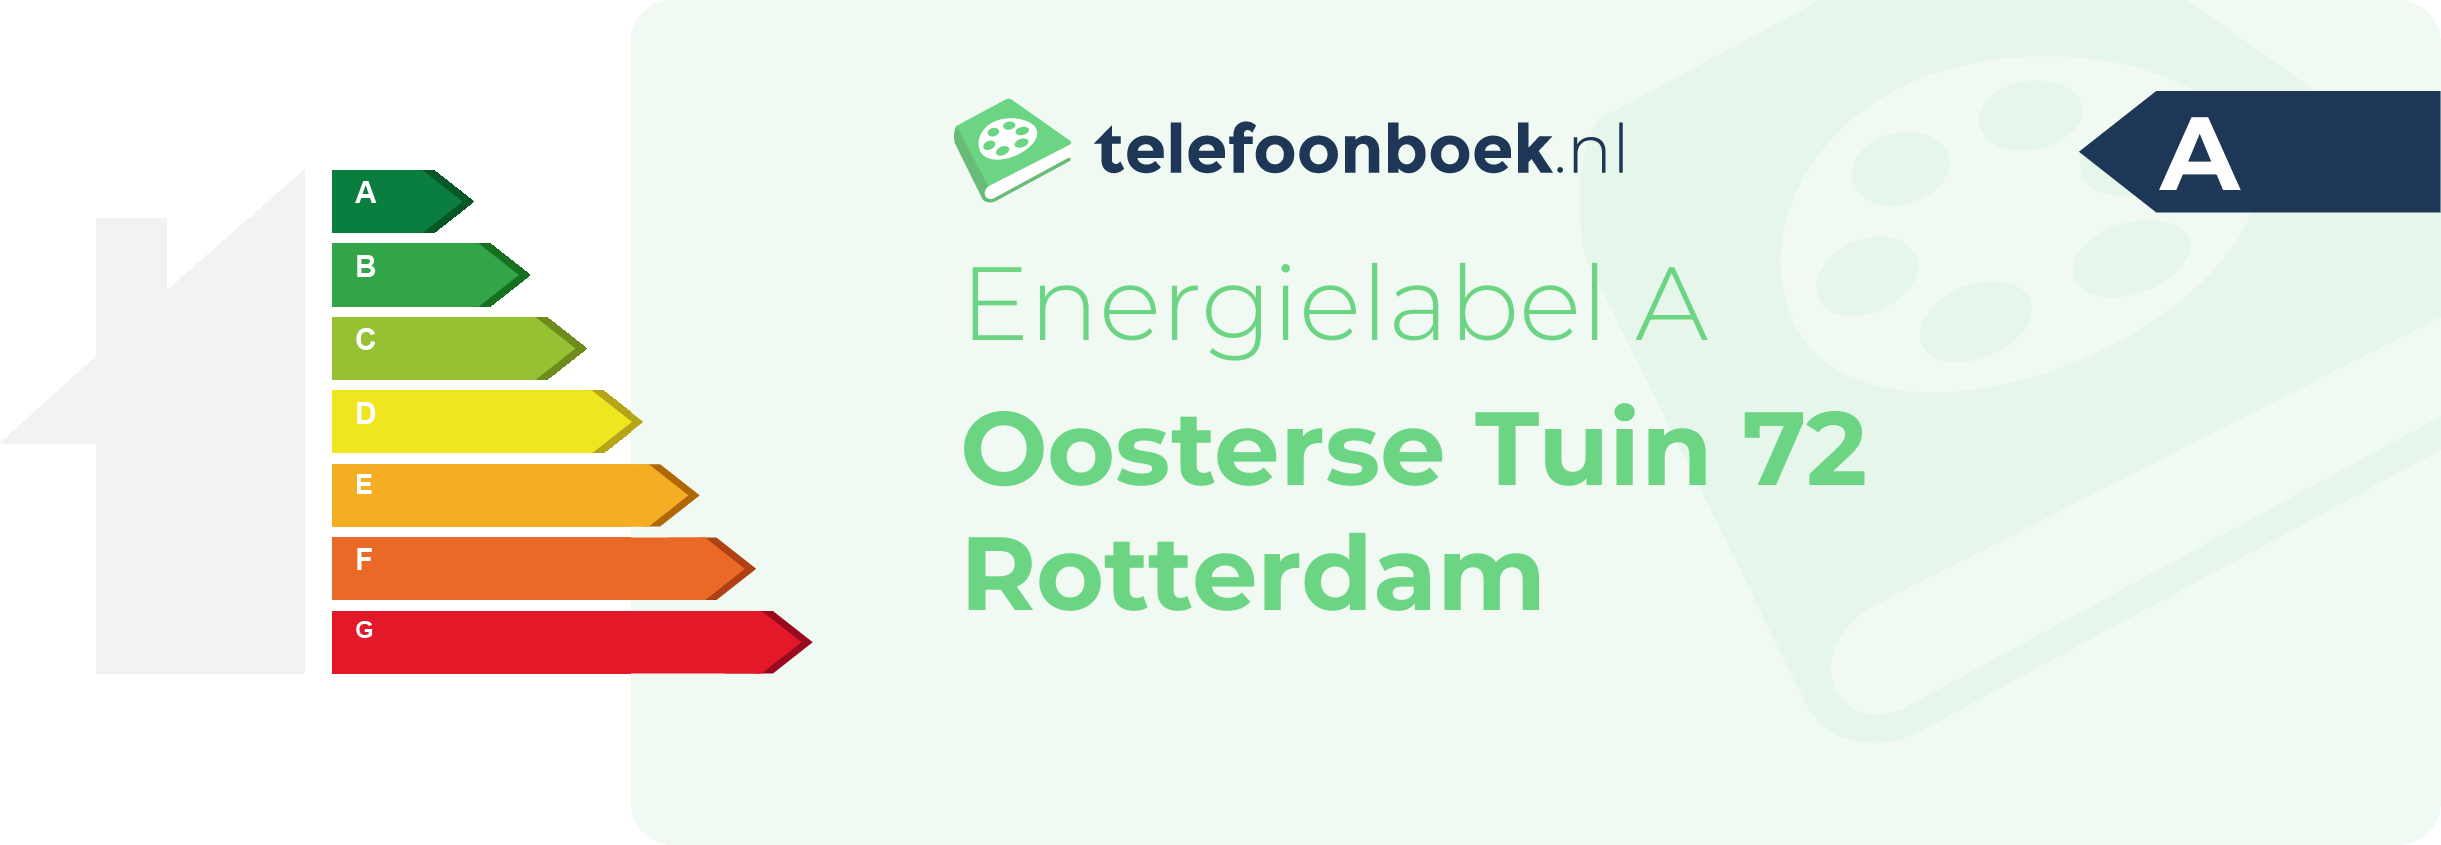 Energielabel Oosterse Tuin 72 Rotterdam